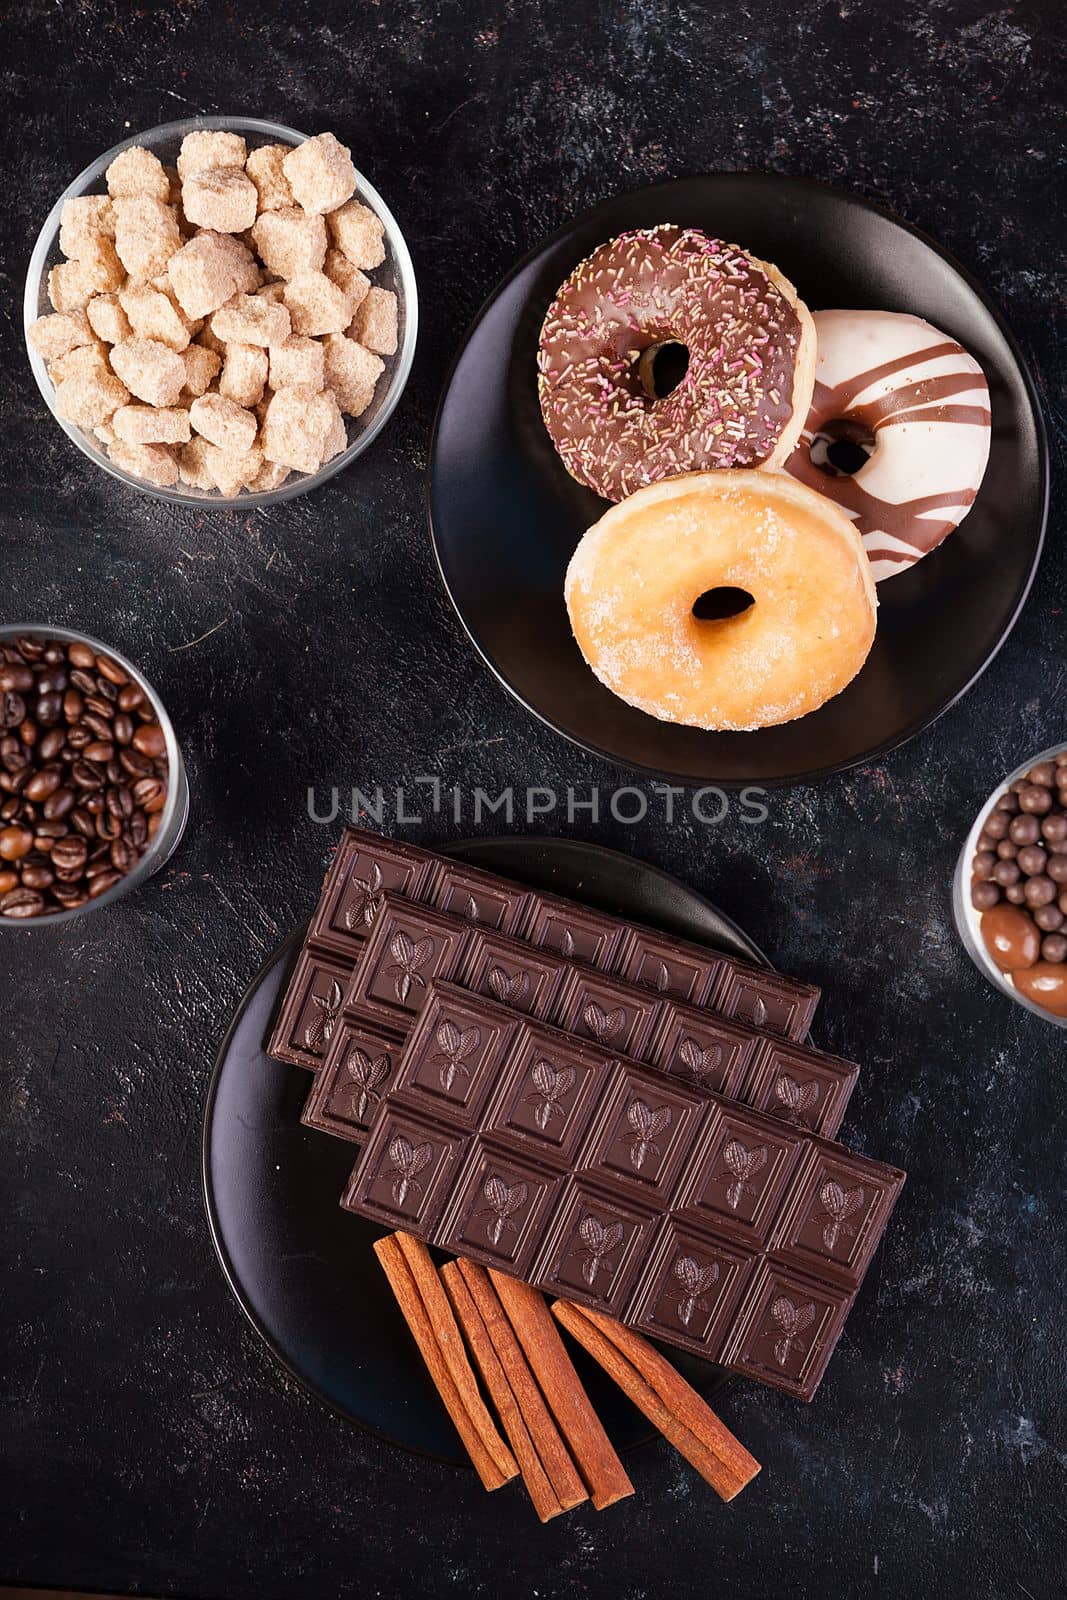 Top view of chocolate tablets, donuts, brown sugar with peanuts in chocolate and coffee beans by DCStudio